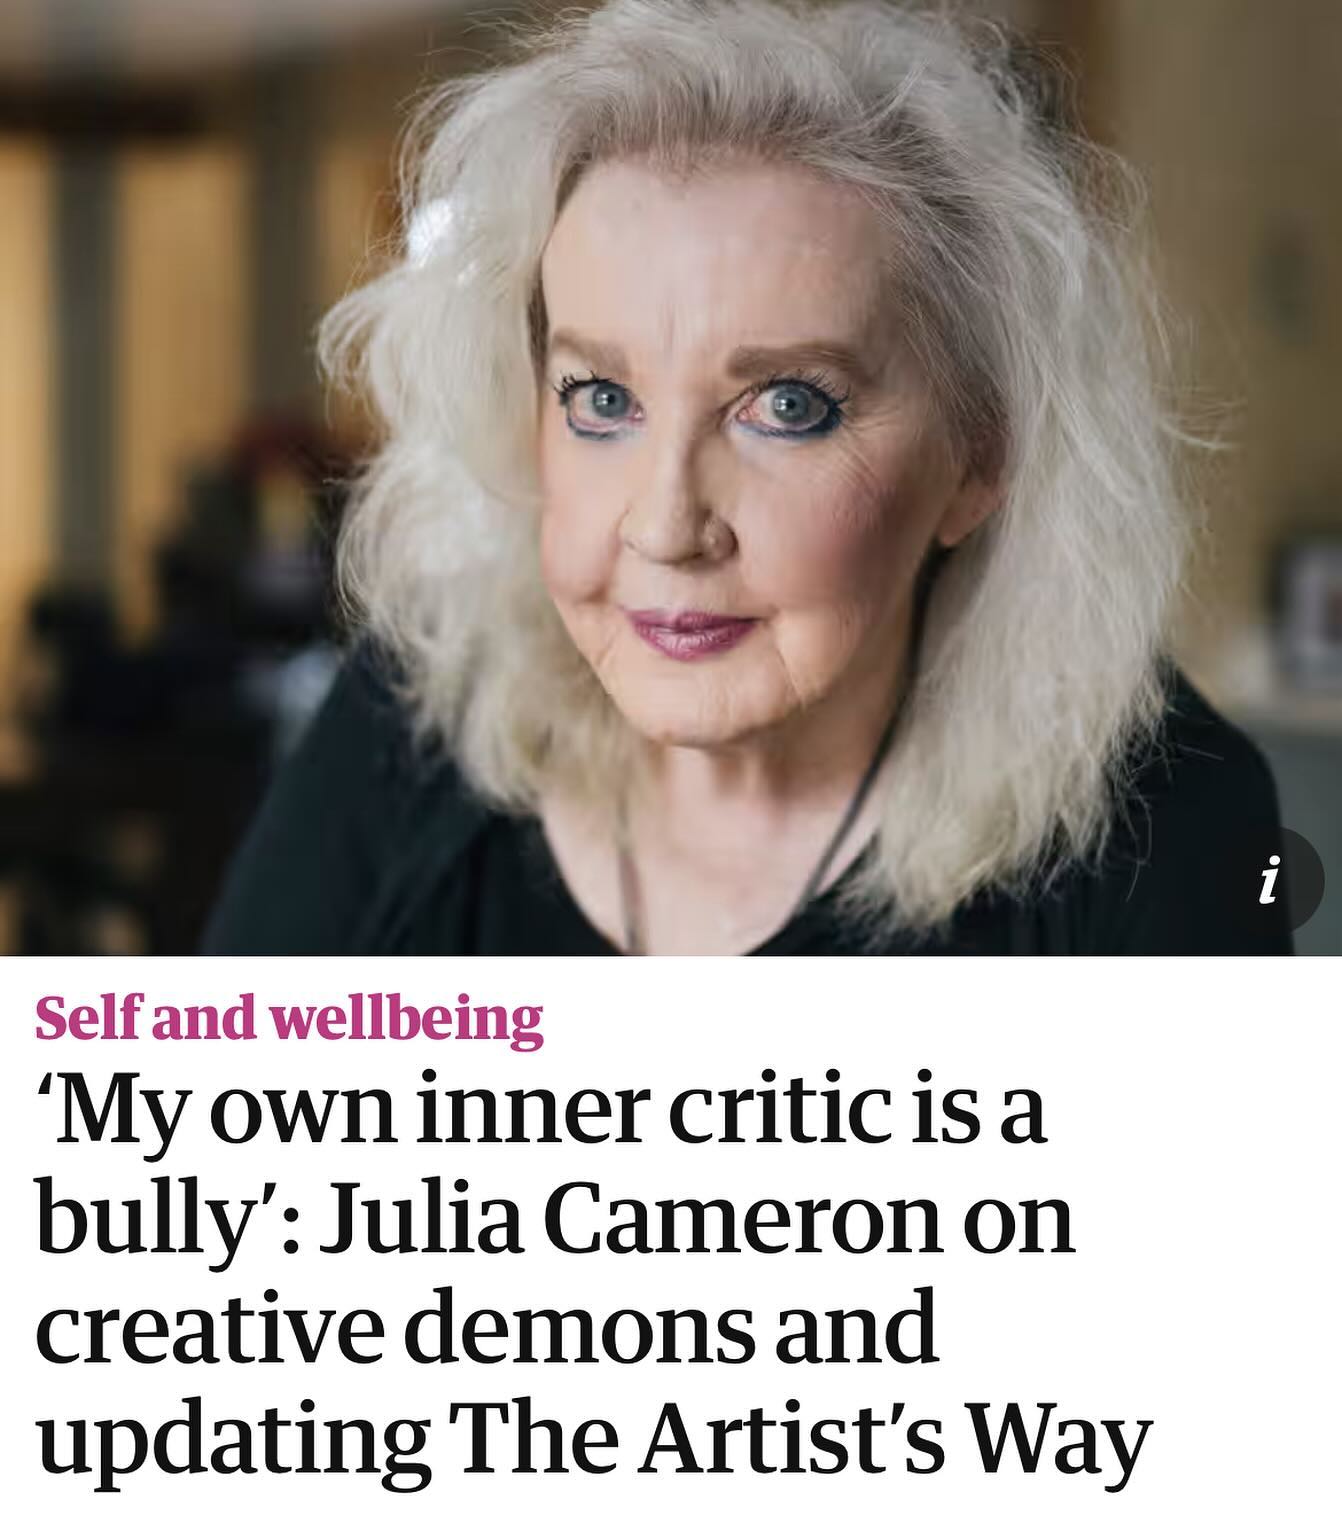 @guardian @souvenir_press @profile.books @tarcherperigee @stmartinsessentials https://www.theguardian.com/lifeandstyle/article/2024/may/12/my-own-inner-critic-is-a-bully-julia-cameron-on-creative-demons-and-updating-the-artists-way?CMP=Share_iOSApp_Other